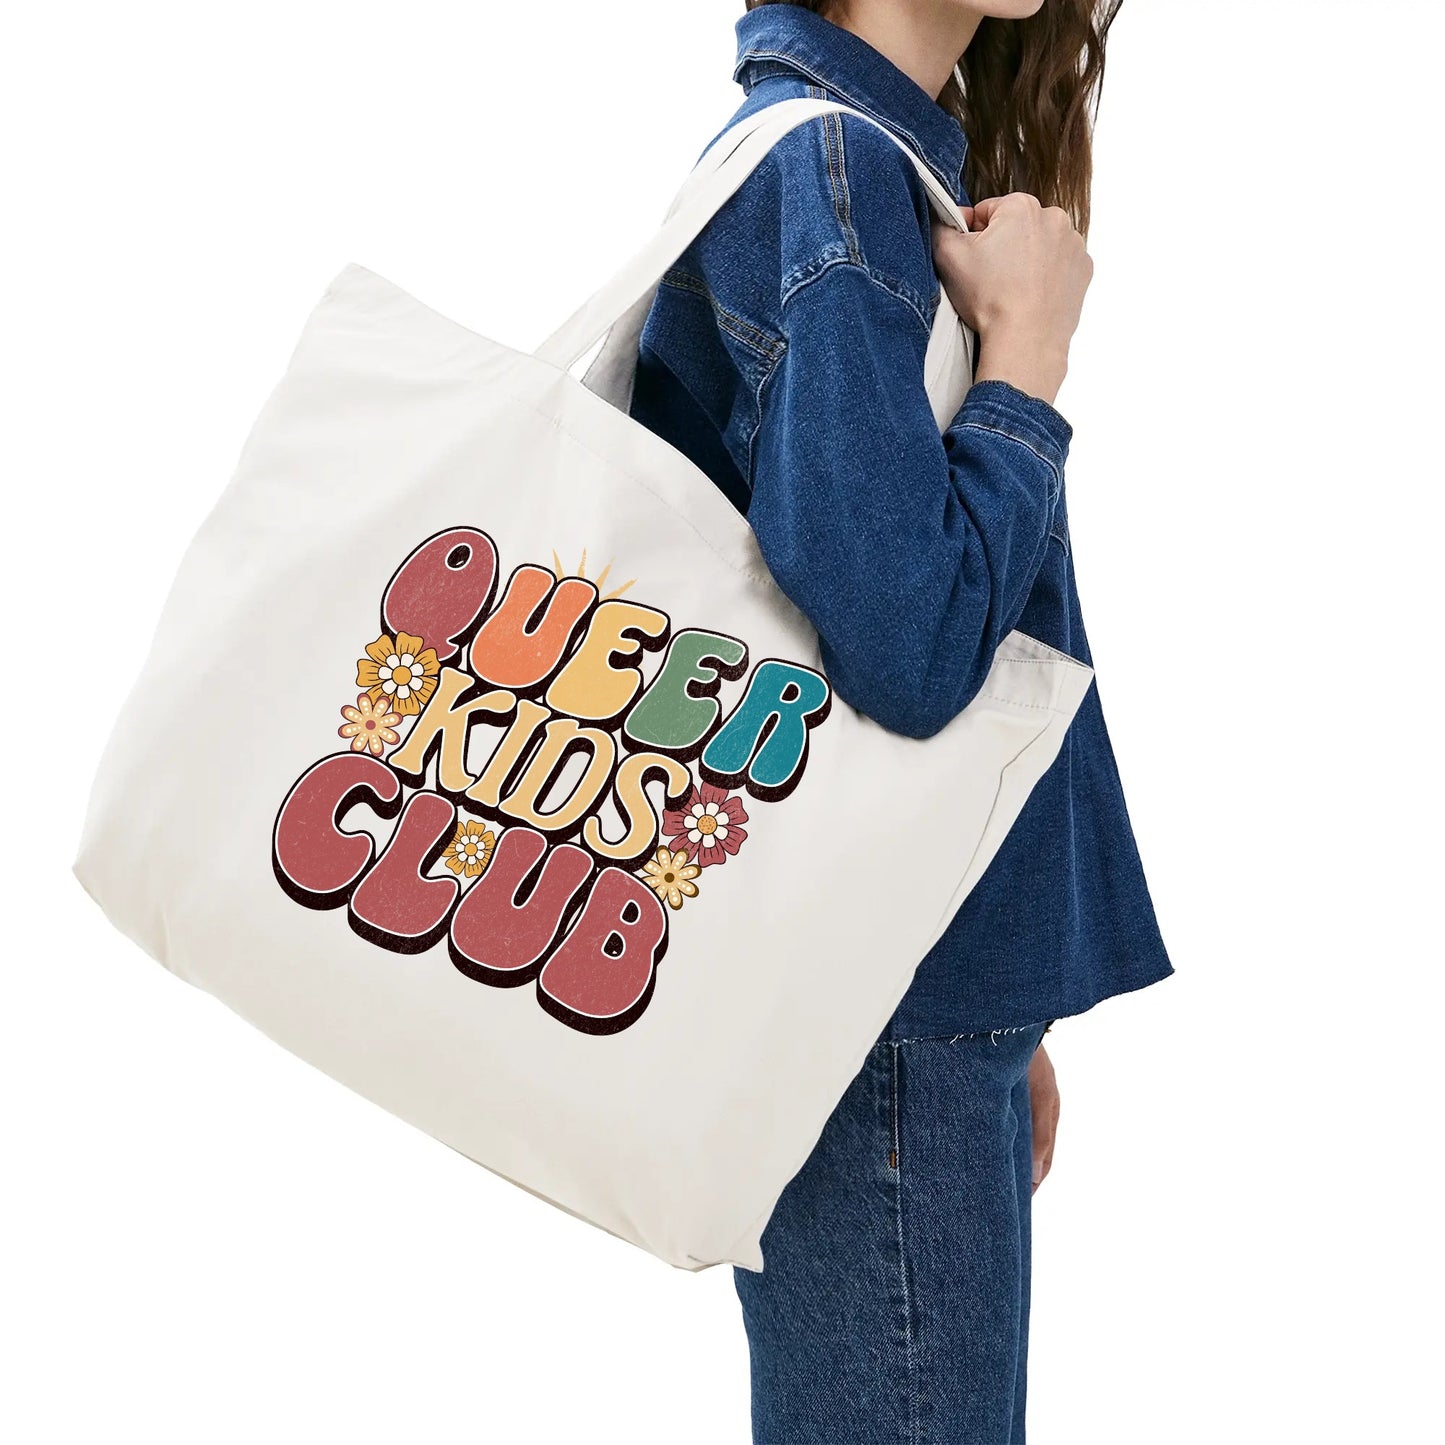 Queer Kids Club Tote Bag - Rose Gold Co. Shop